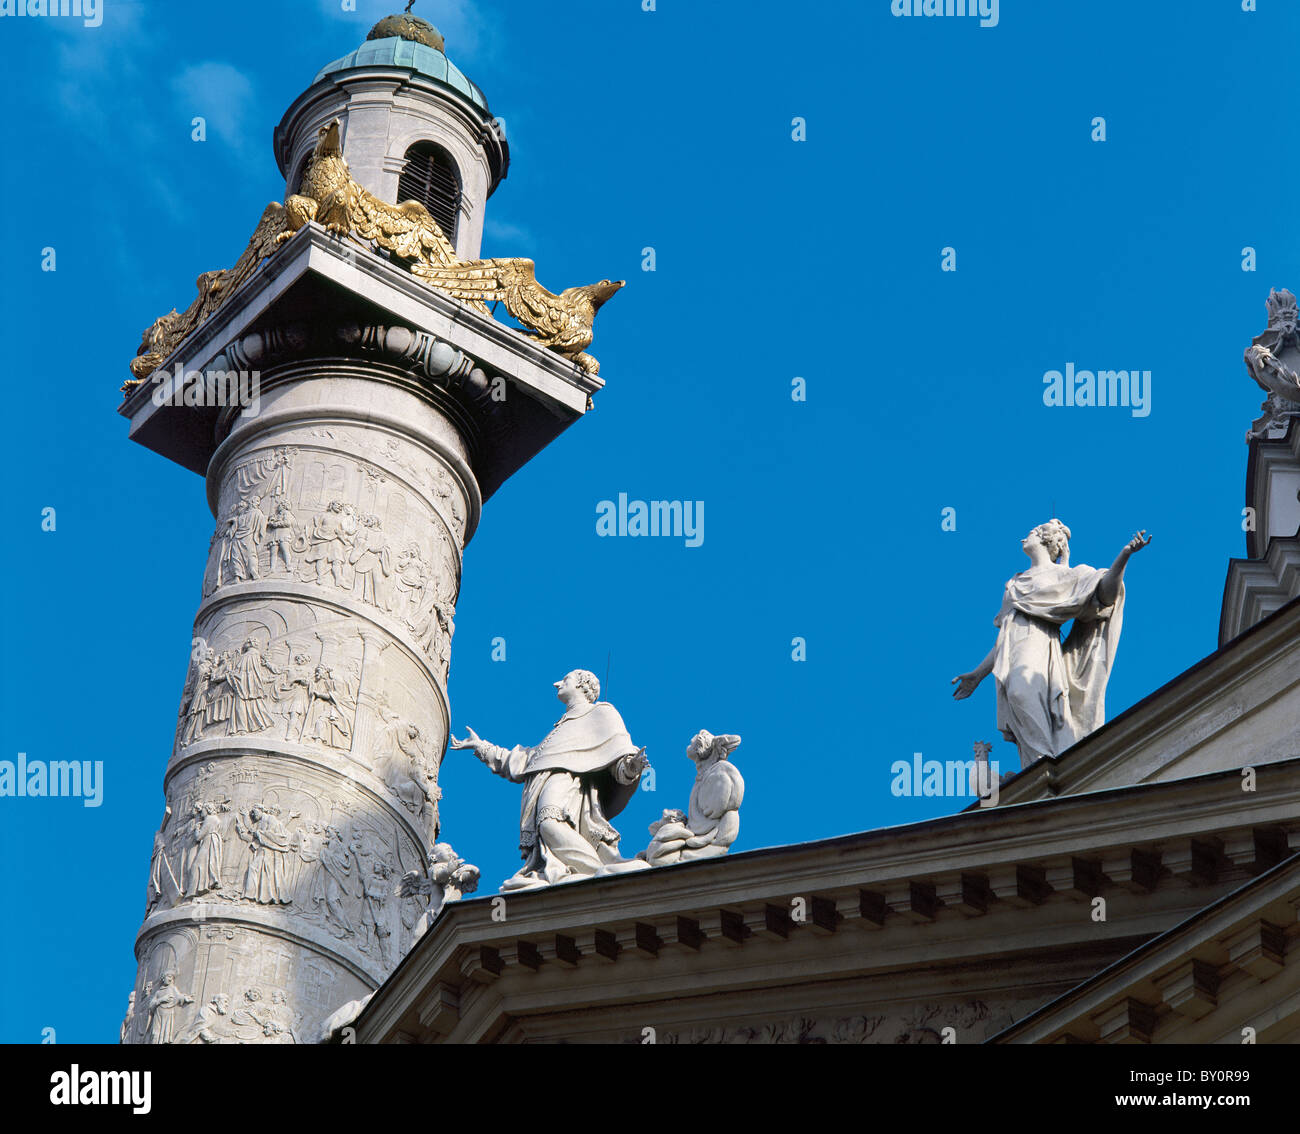 Karlskirche. Column on the left side of the church depicting scenes from the life of St. Charles Borromeo. Vienna. Austria. Stock Photo